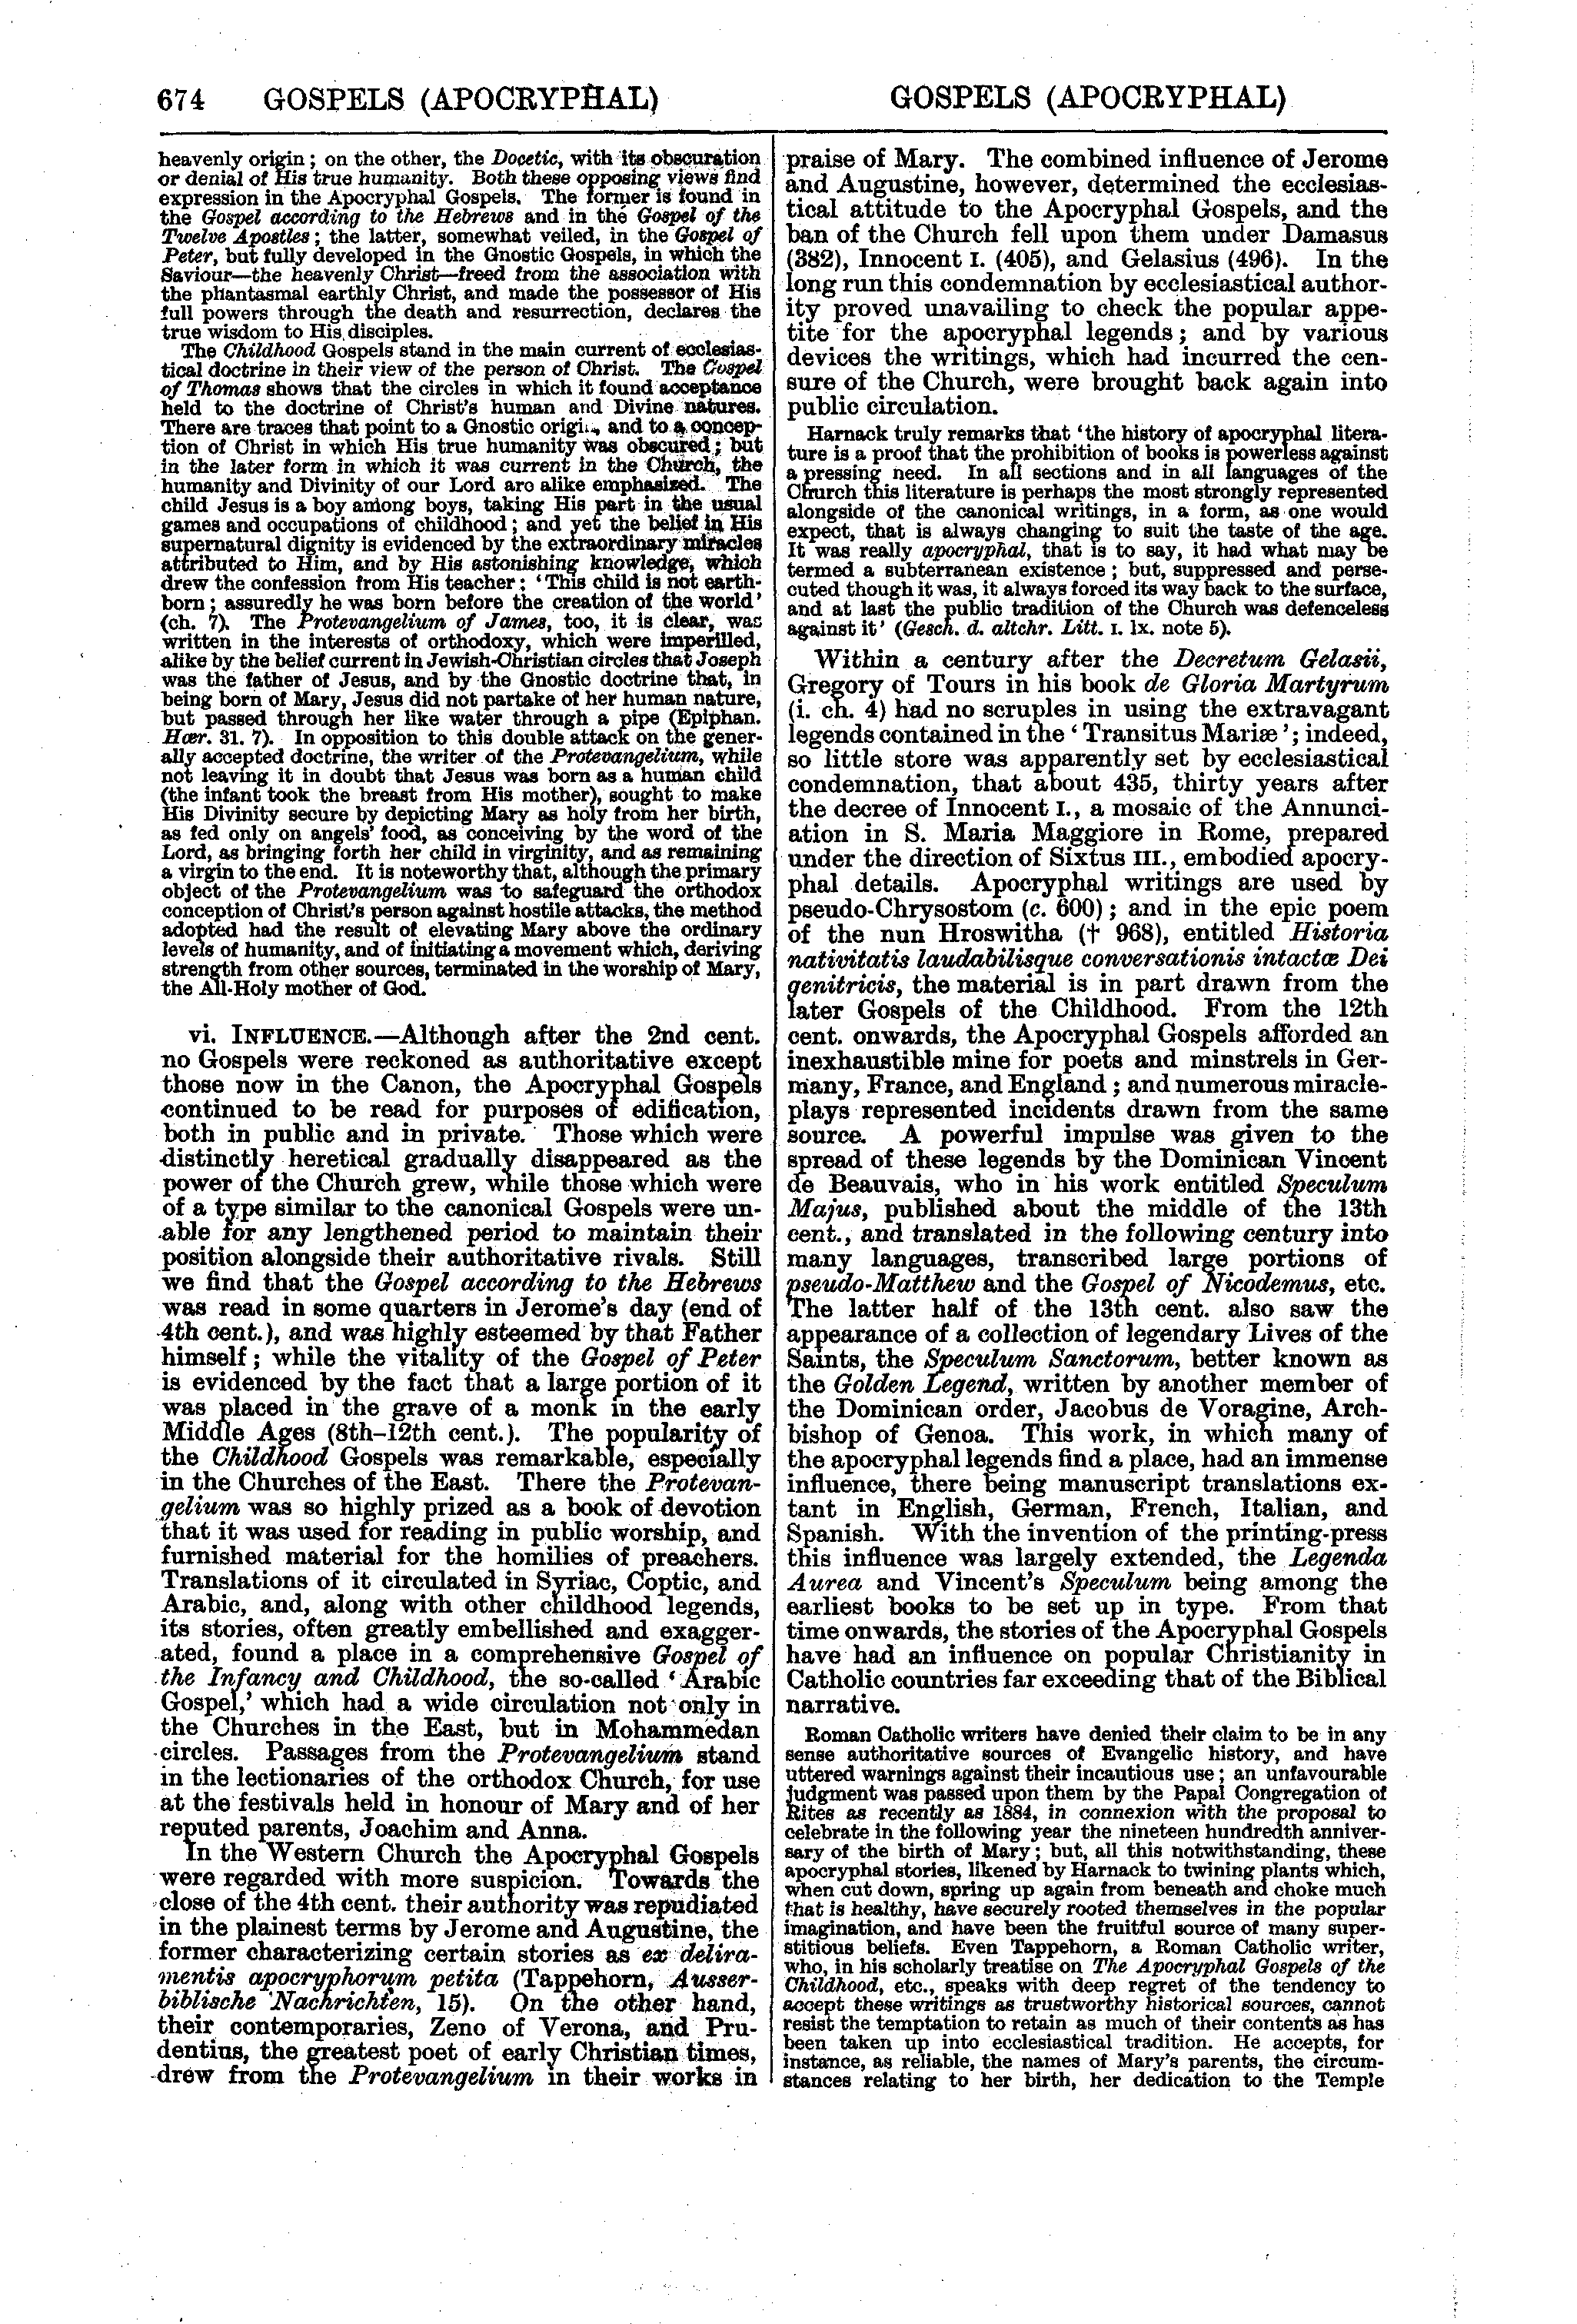 Image of page 674